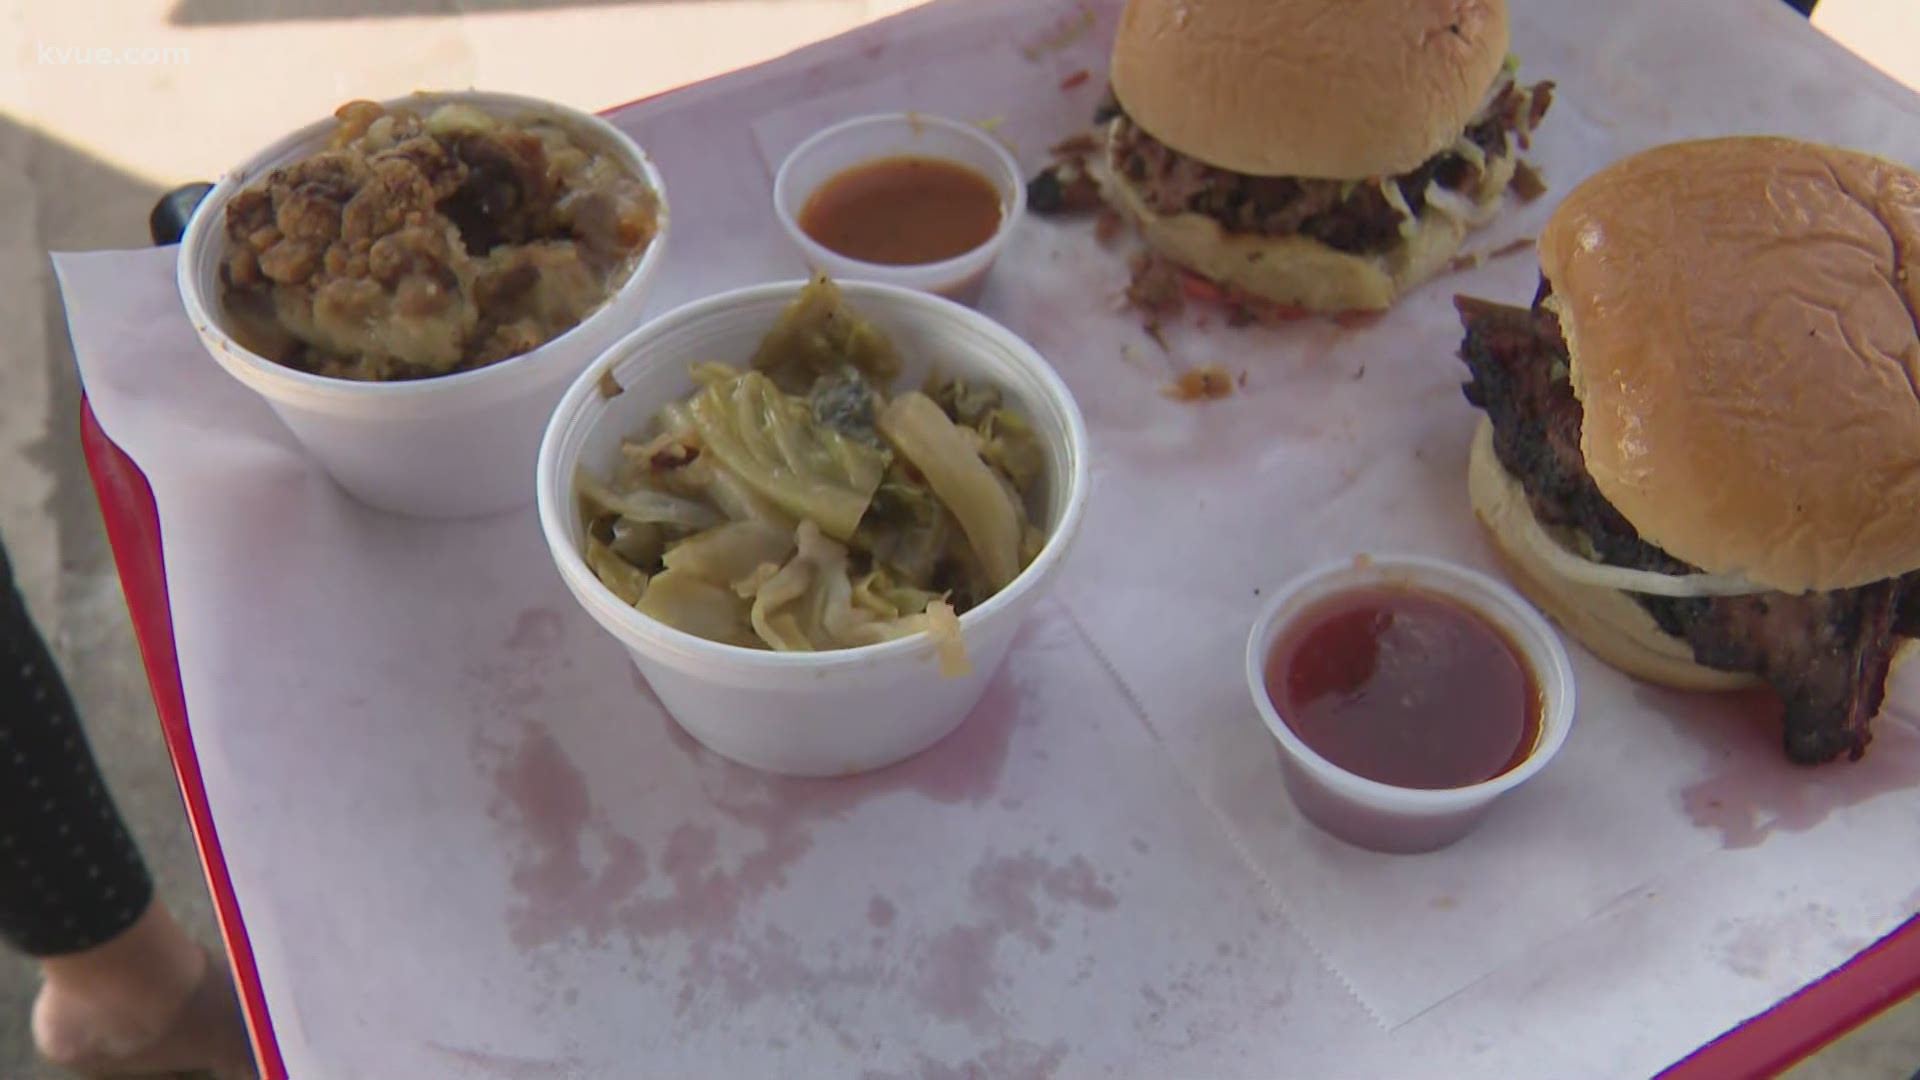 Try this Texas barbecue while supporting local.